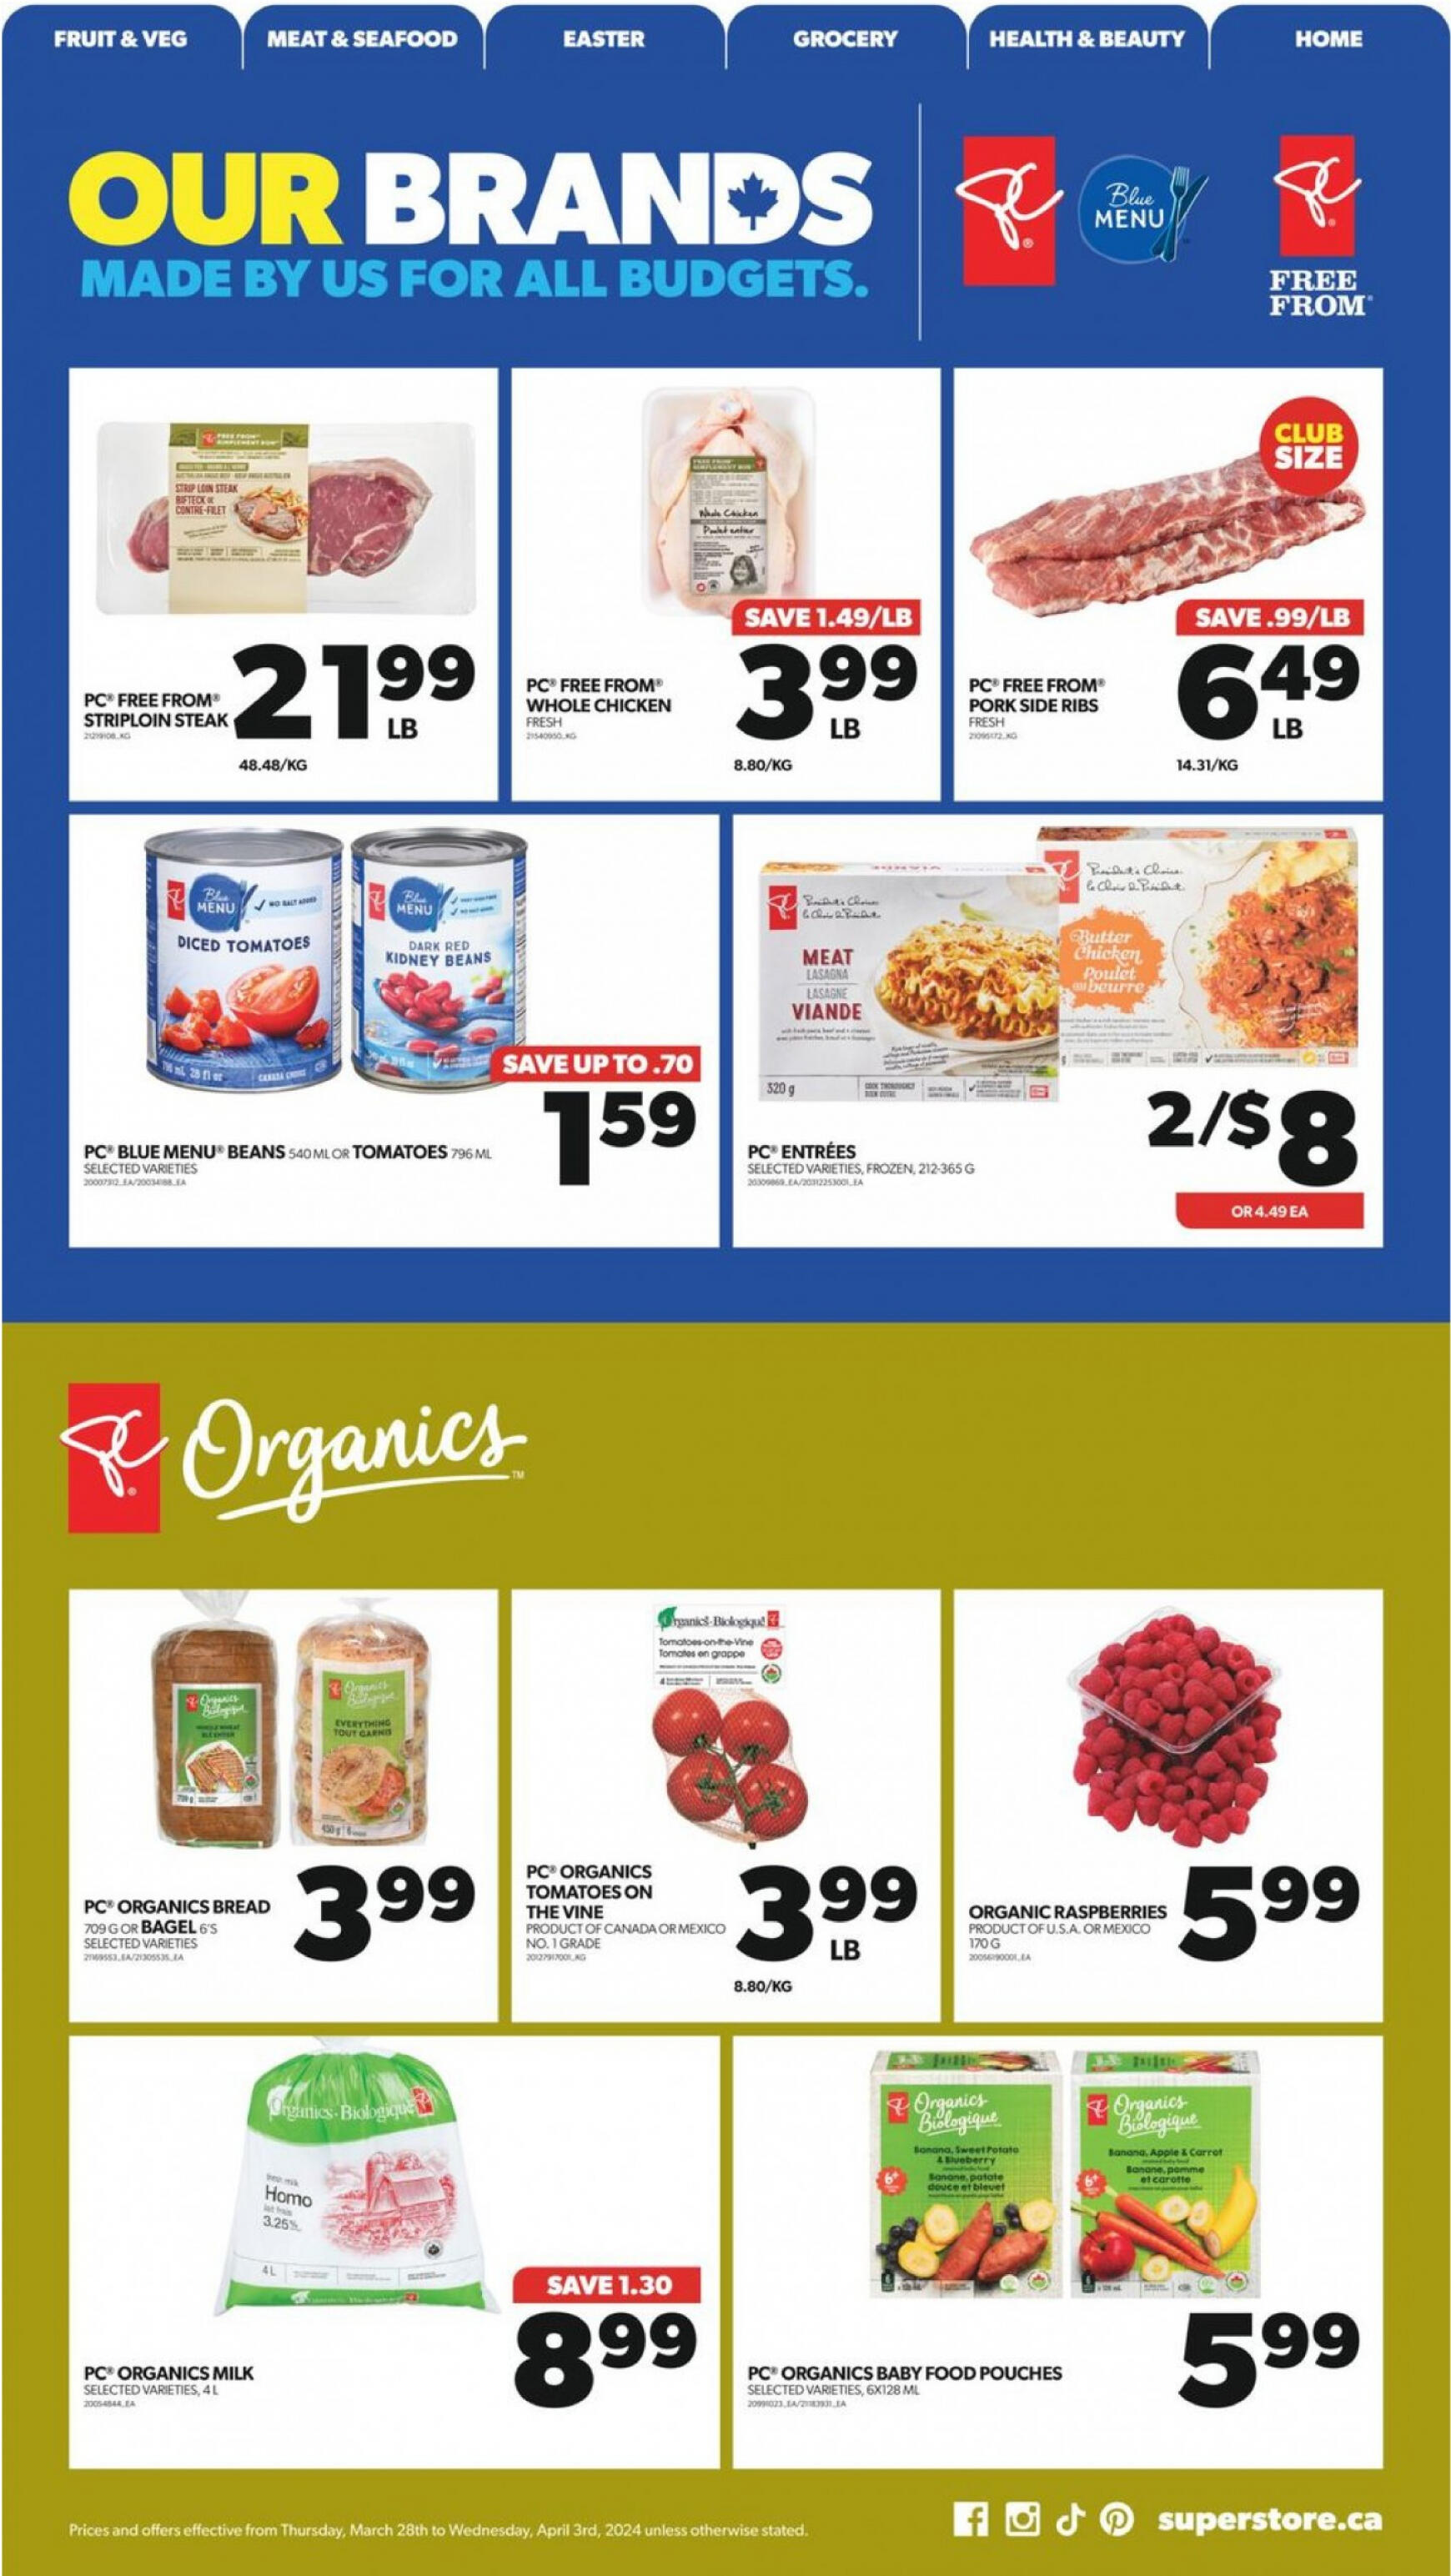 real-canadian-superstore - Real Canadian Superstore flyer current 28.03. - 03.04. - page: 17